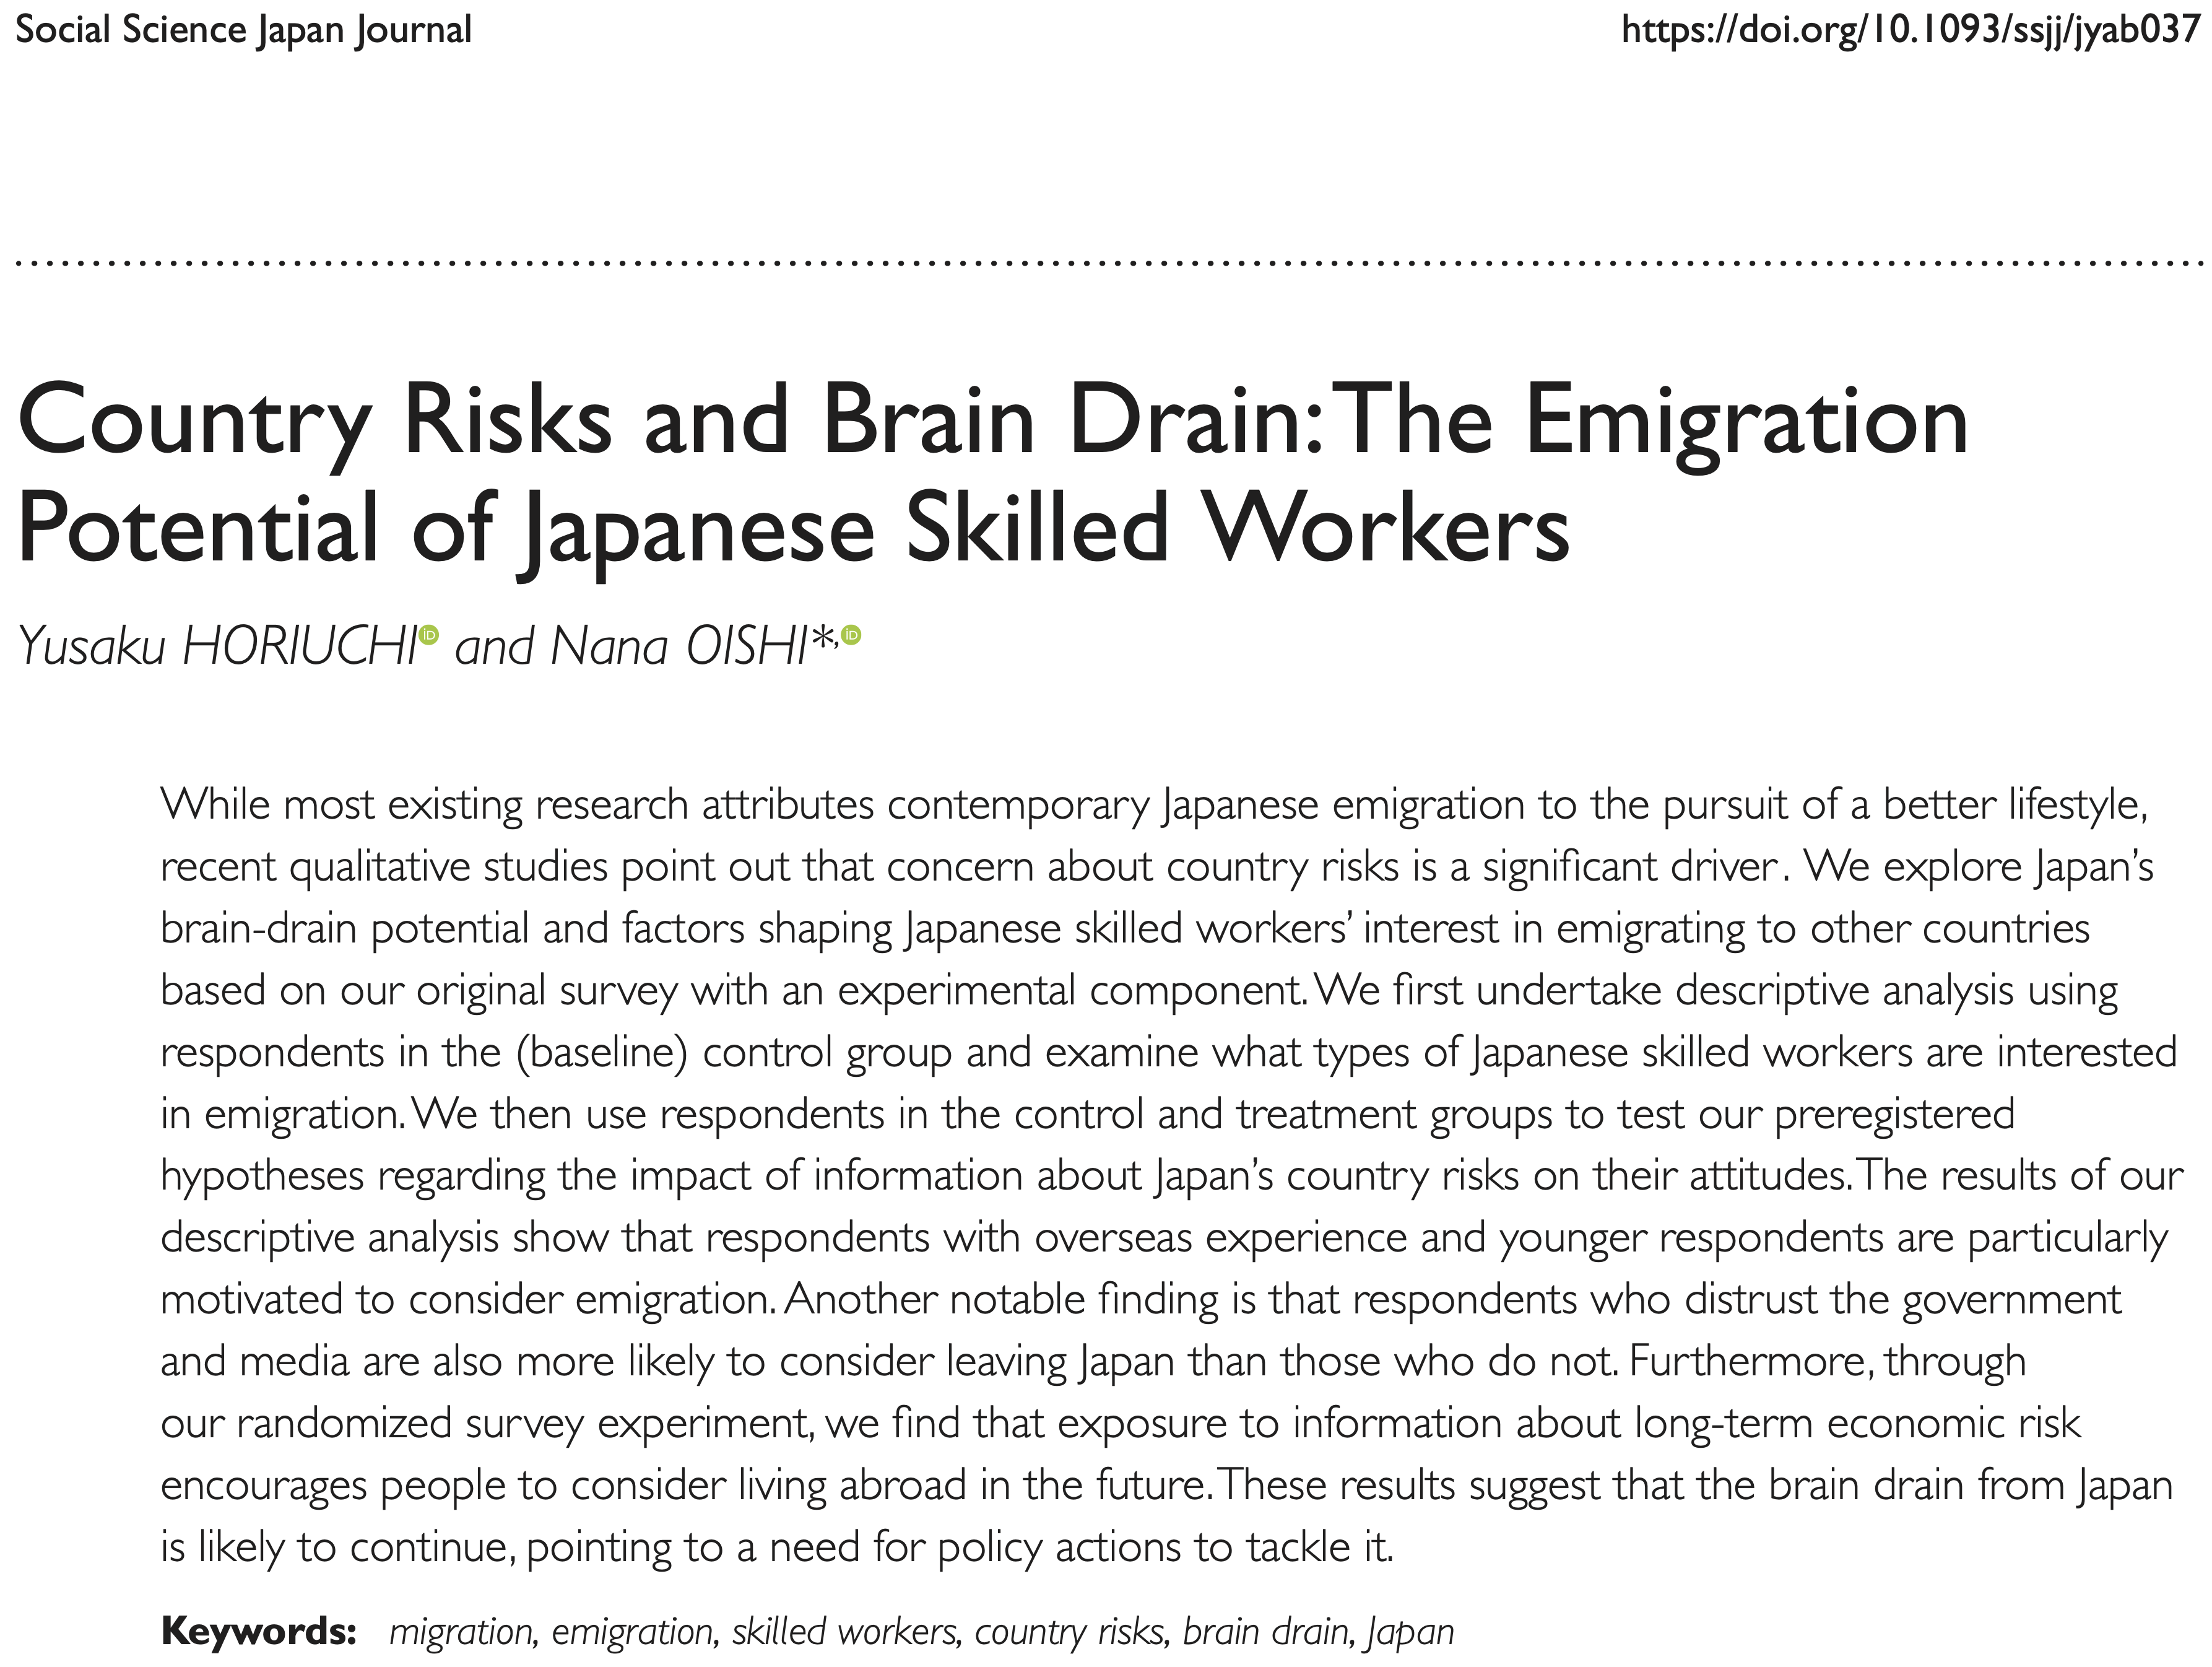 Published in Social Science Japan Journal